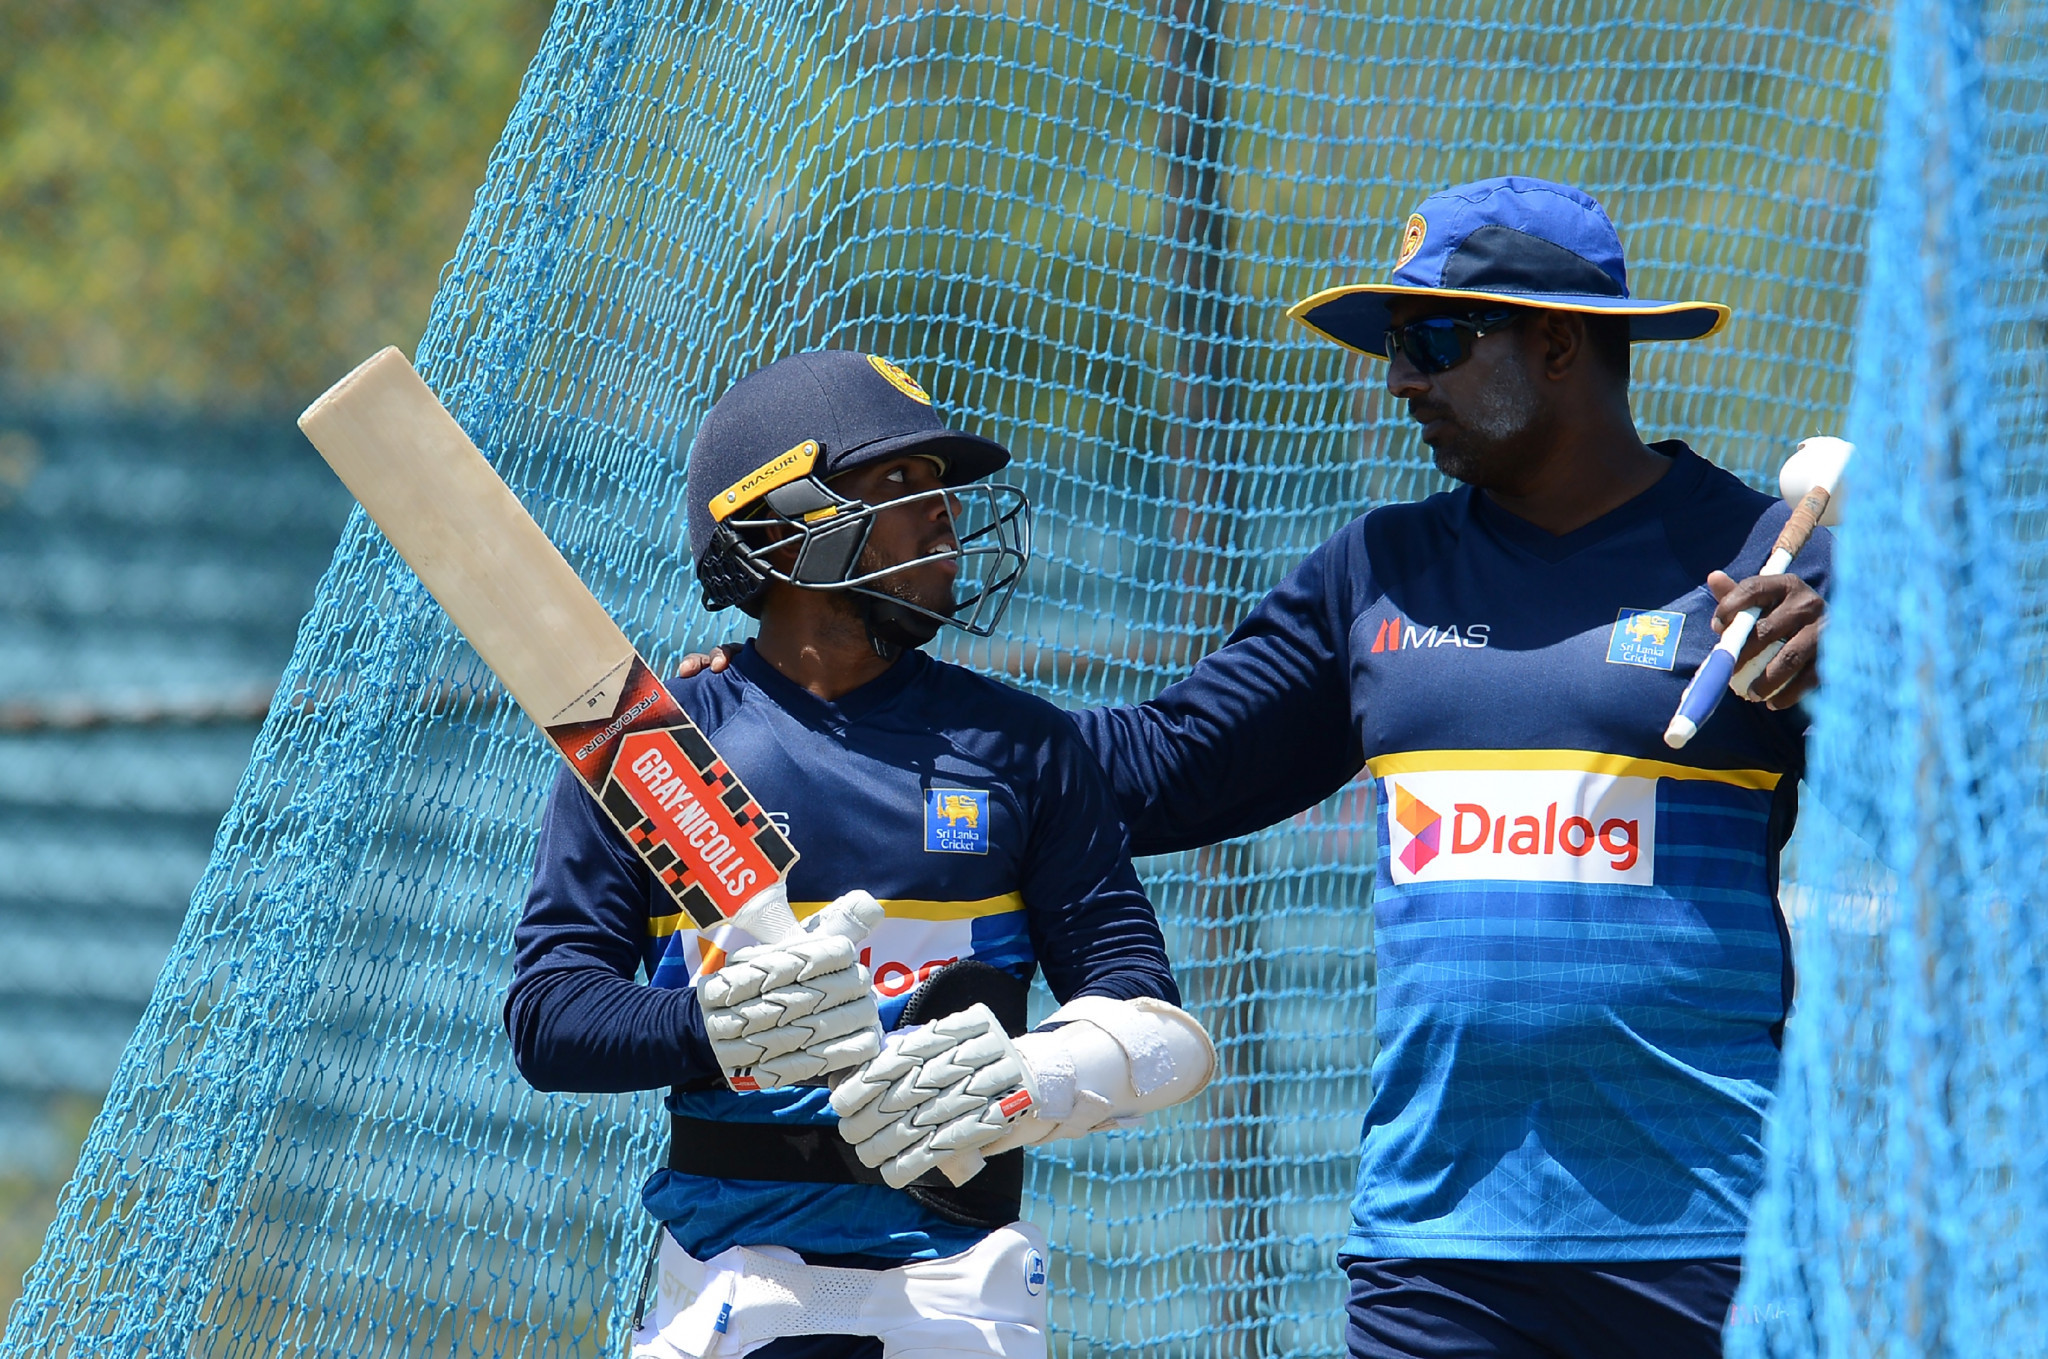 Gunawardene becomes latest former Sri Lanka cricketer charged with match-fixing by ICC